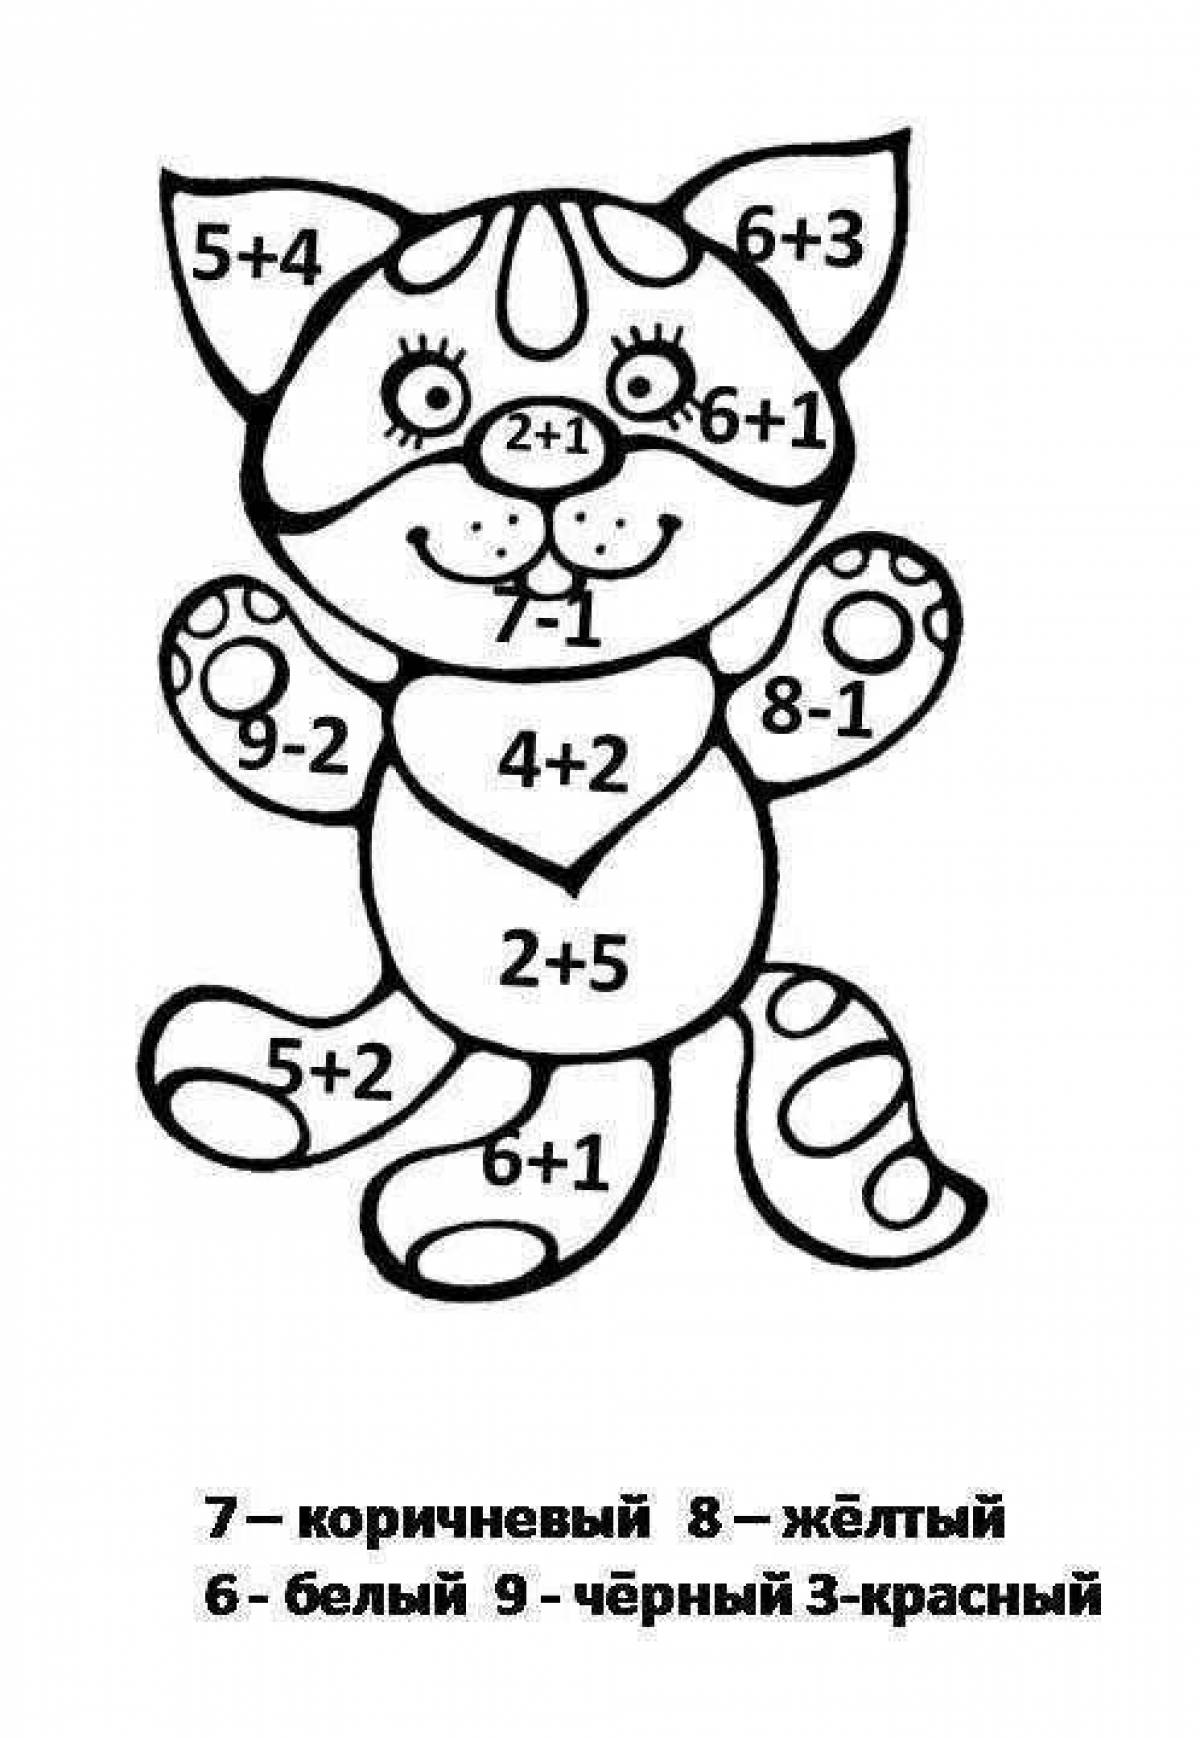 Witty 3rd grade math coloring book